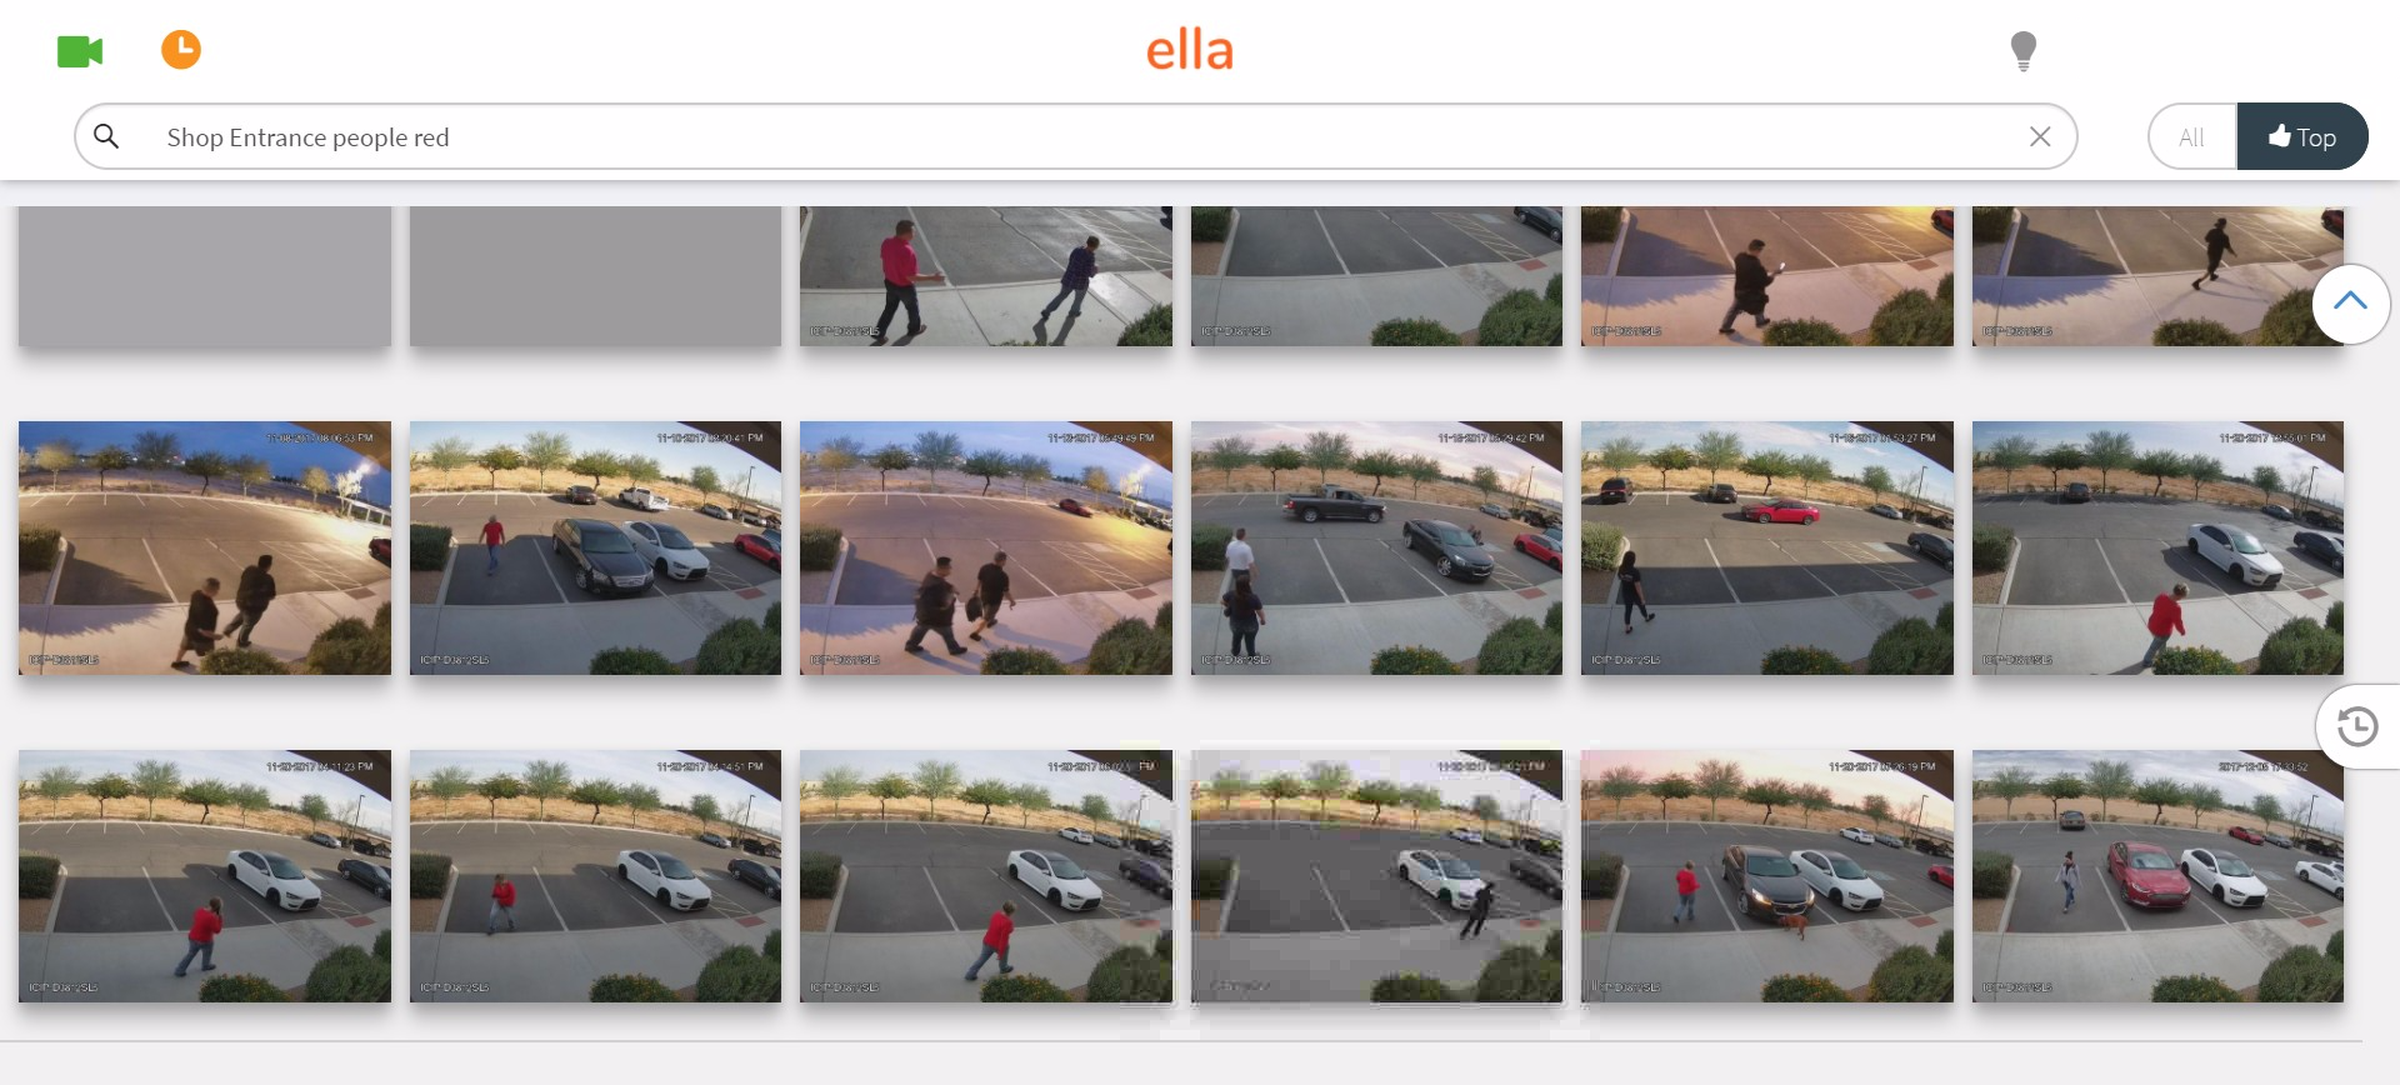 A screenshot showing Ella being used to search for people wearing red.